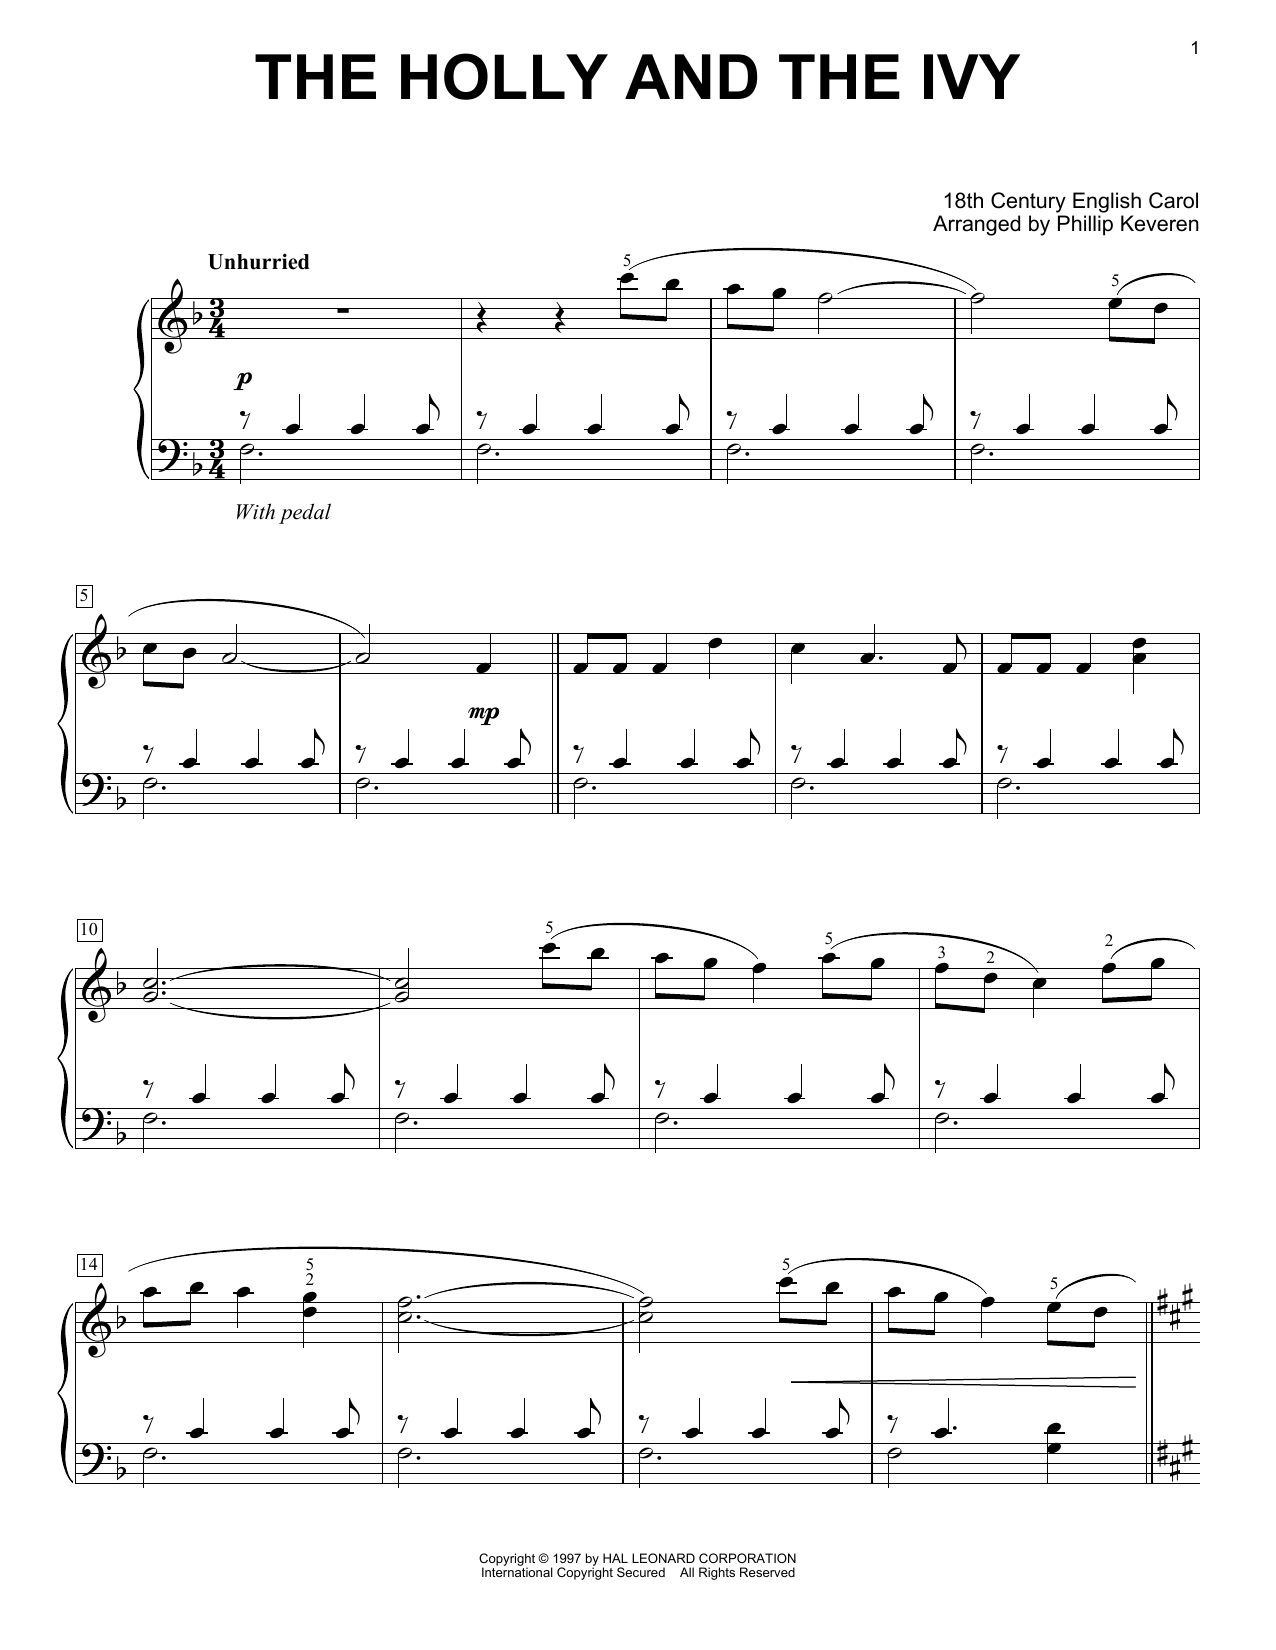 Download 18th Century English Carol The Holly And The Ivy (arr. Phillip Kev Sheet Music